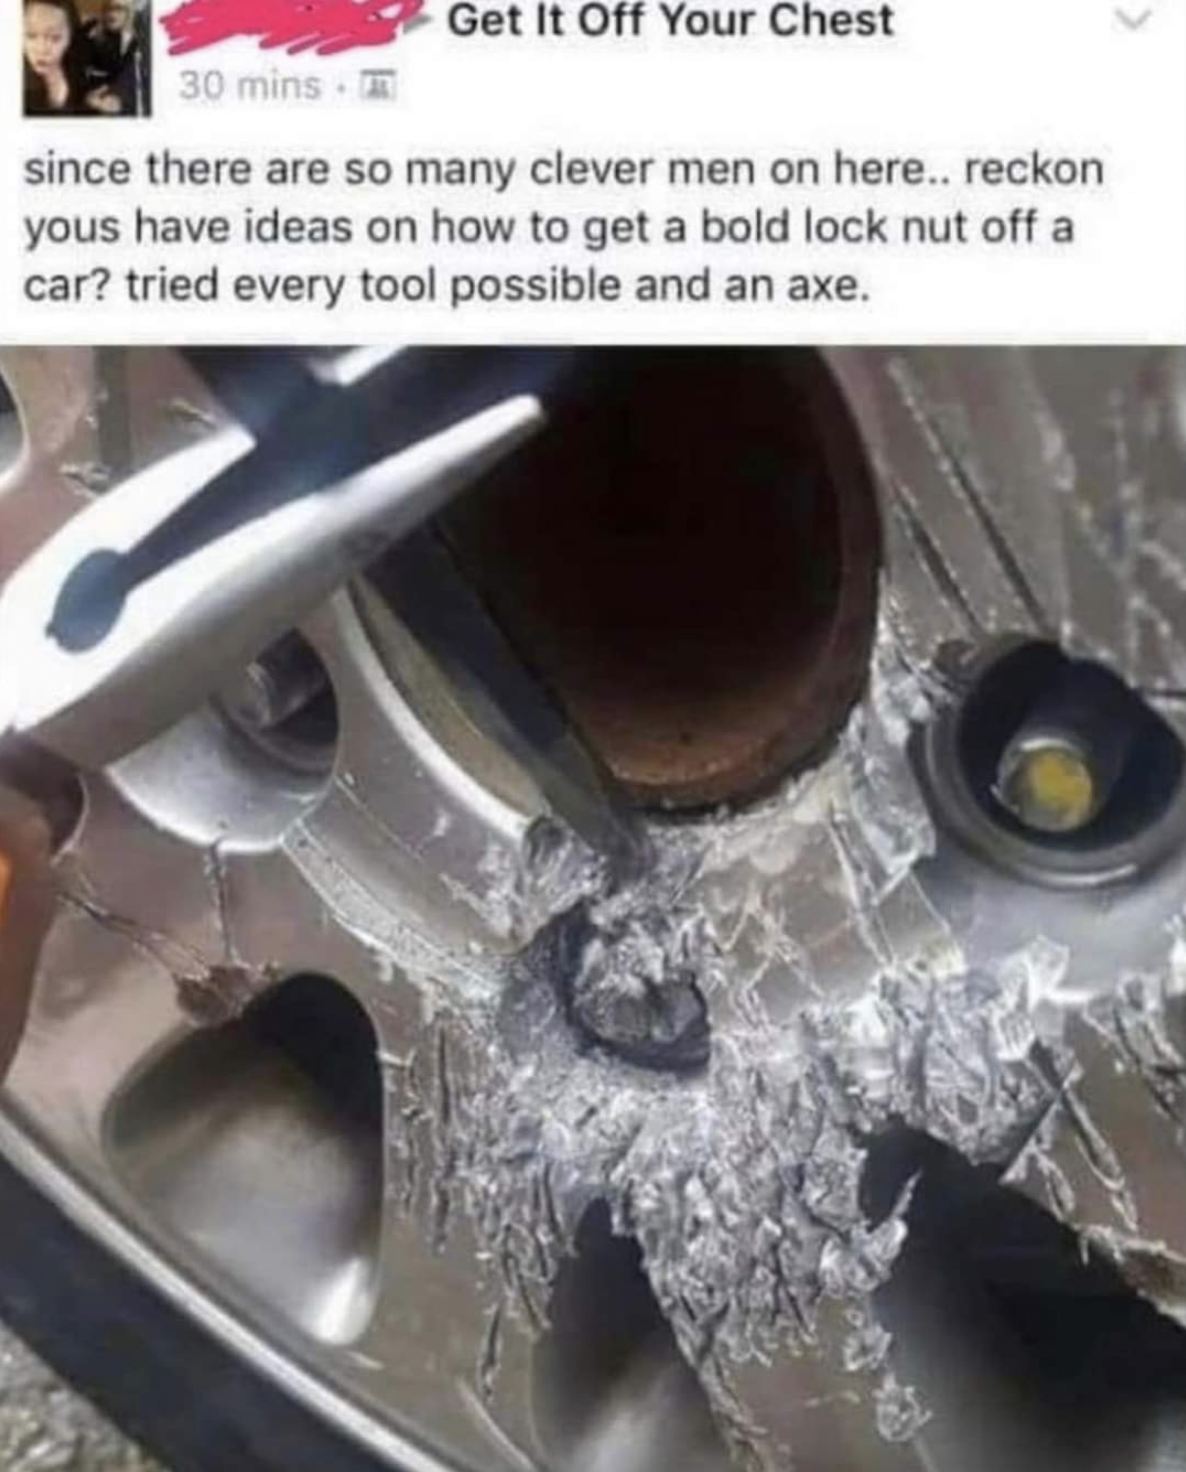 Crazy People of Facebook - since there are so many clever men on here.. reckon yous have ideas on how to get a bold lock nut off a car? tried every tool possible and an axe.